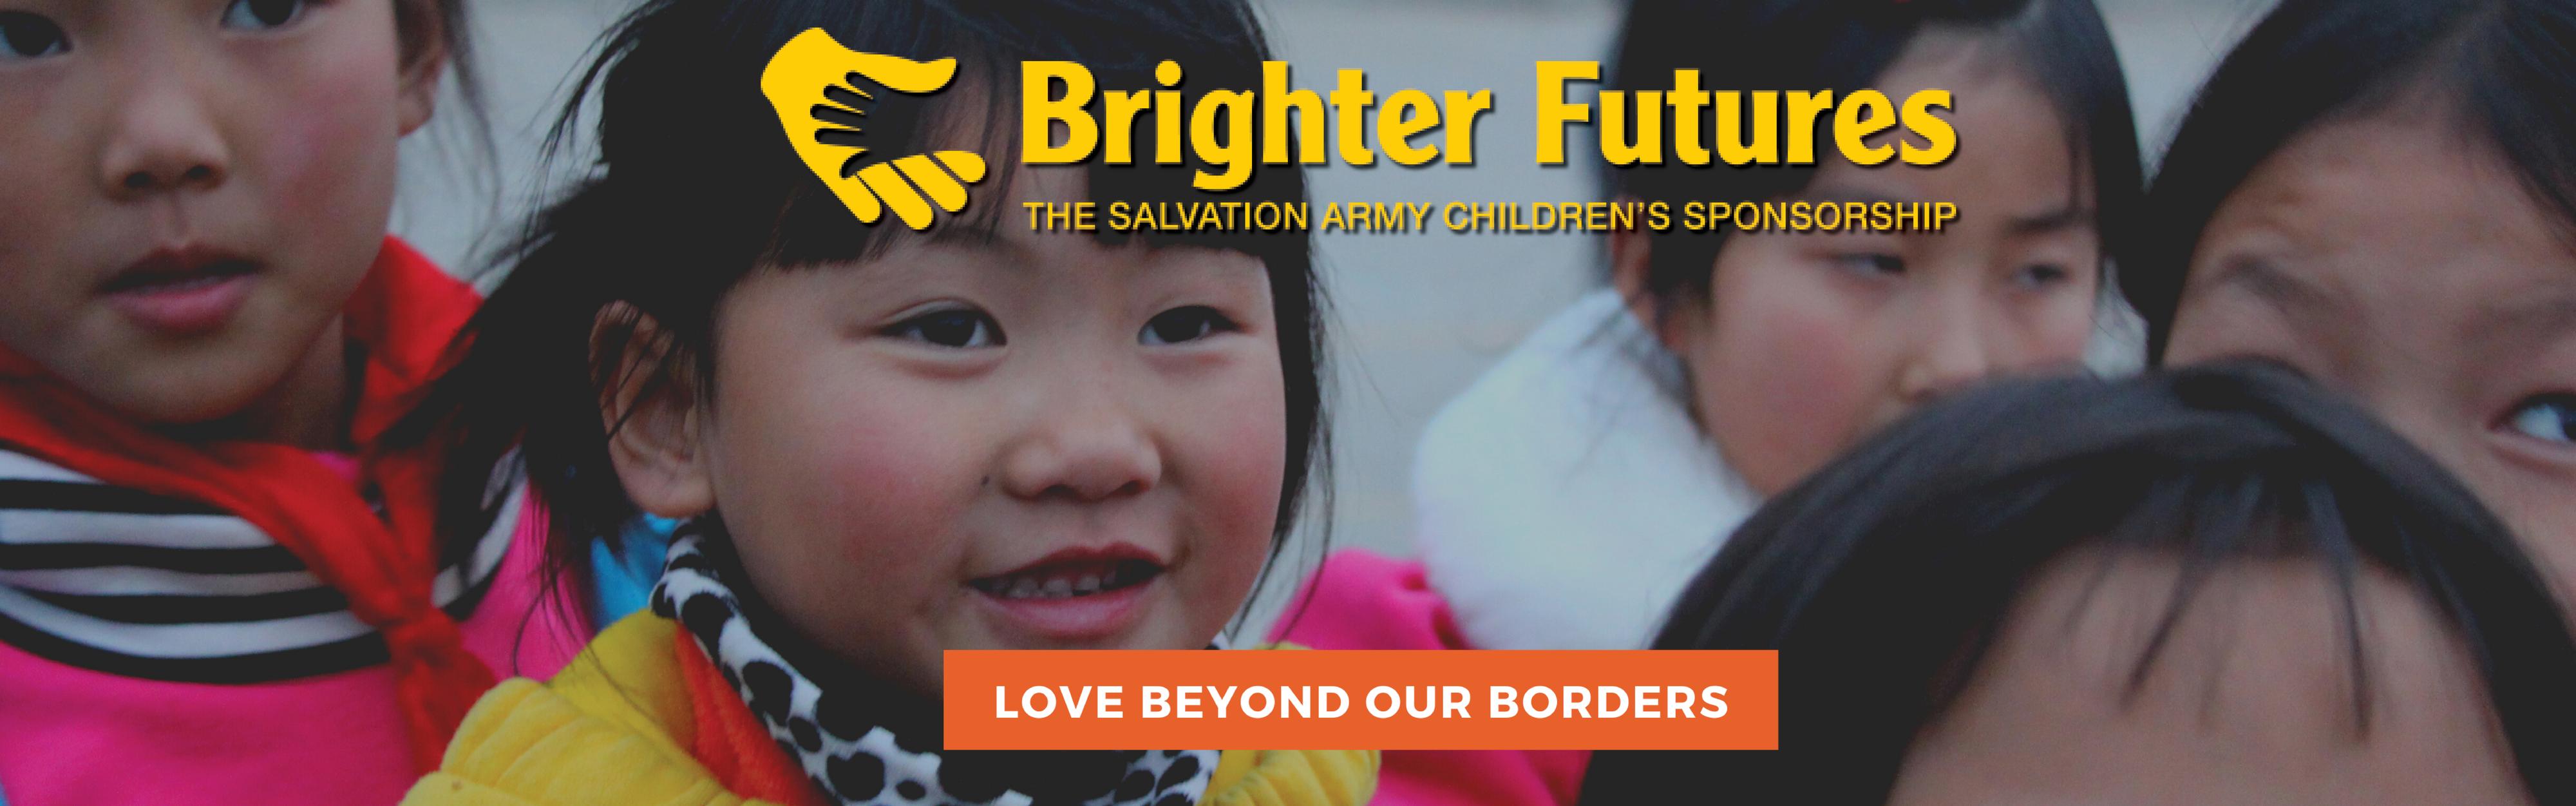 Brighter Futures banner - photo of smiling girls from China smiling